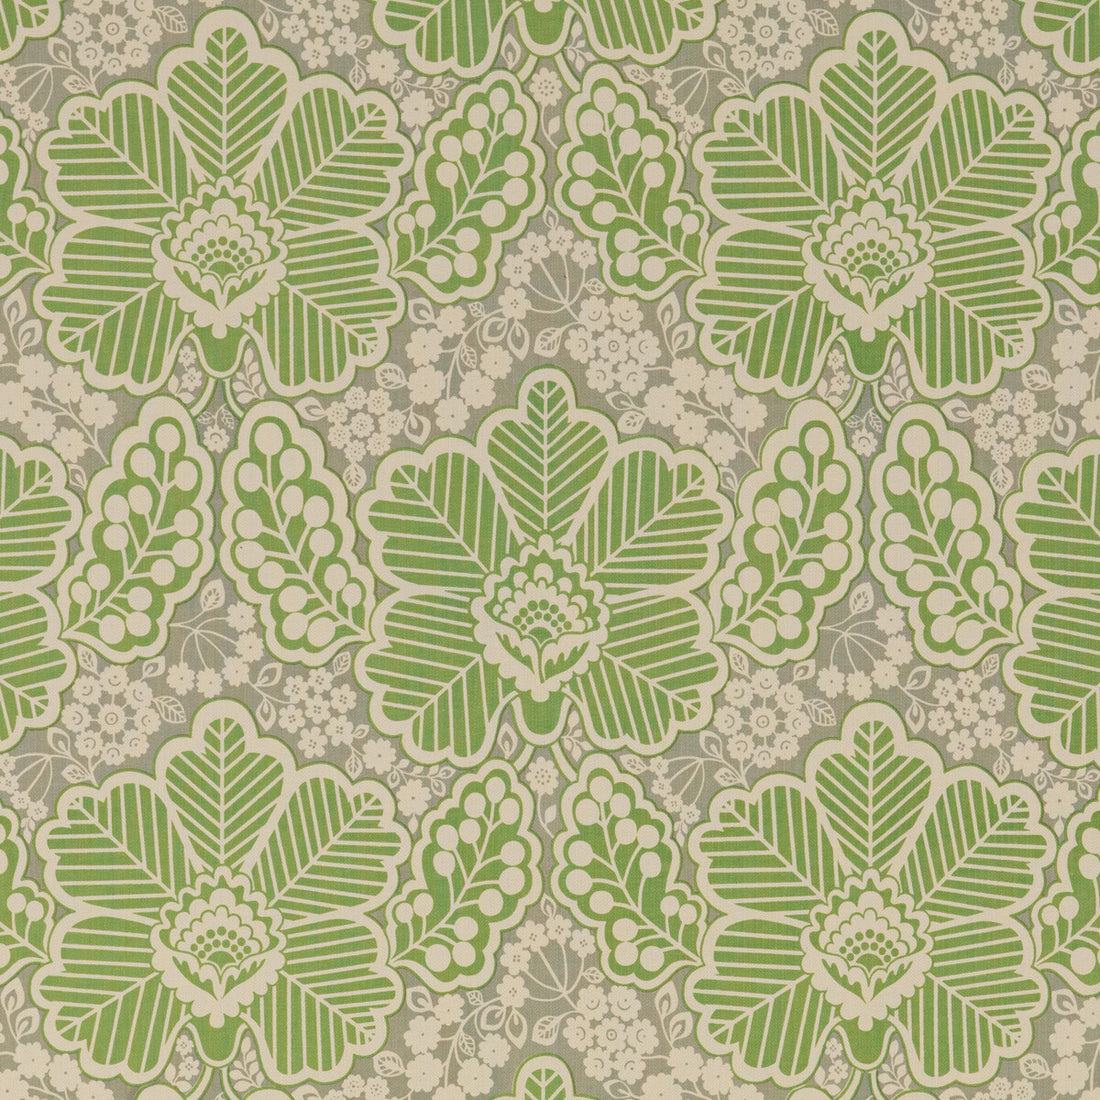 Arbour fabric in green color - pattern PP50479.5.0 - by Baker Lifestyle in the Block Party collection